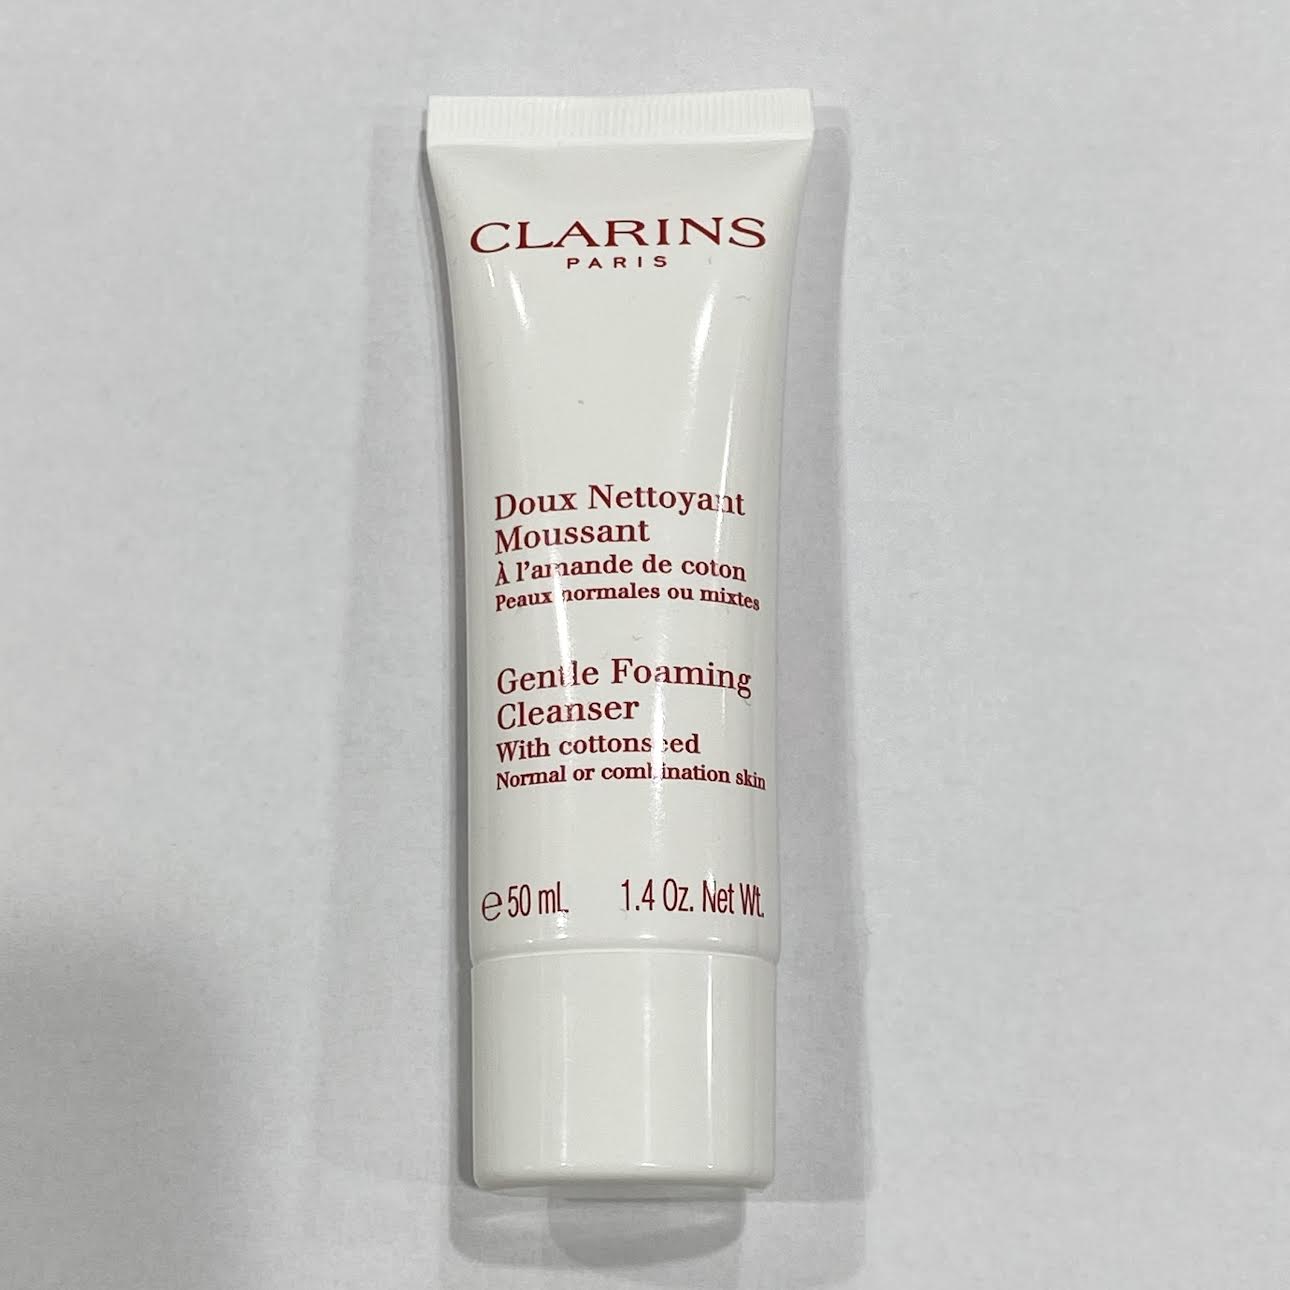 WHOLESALE CLARINS GENTLE FOAMING CLEANSER WITH COTTONSEED 1.4 OZ - 50 PIECE LOT